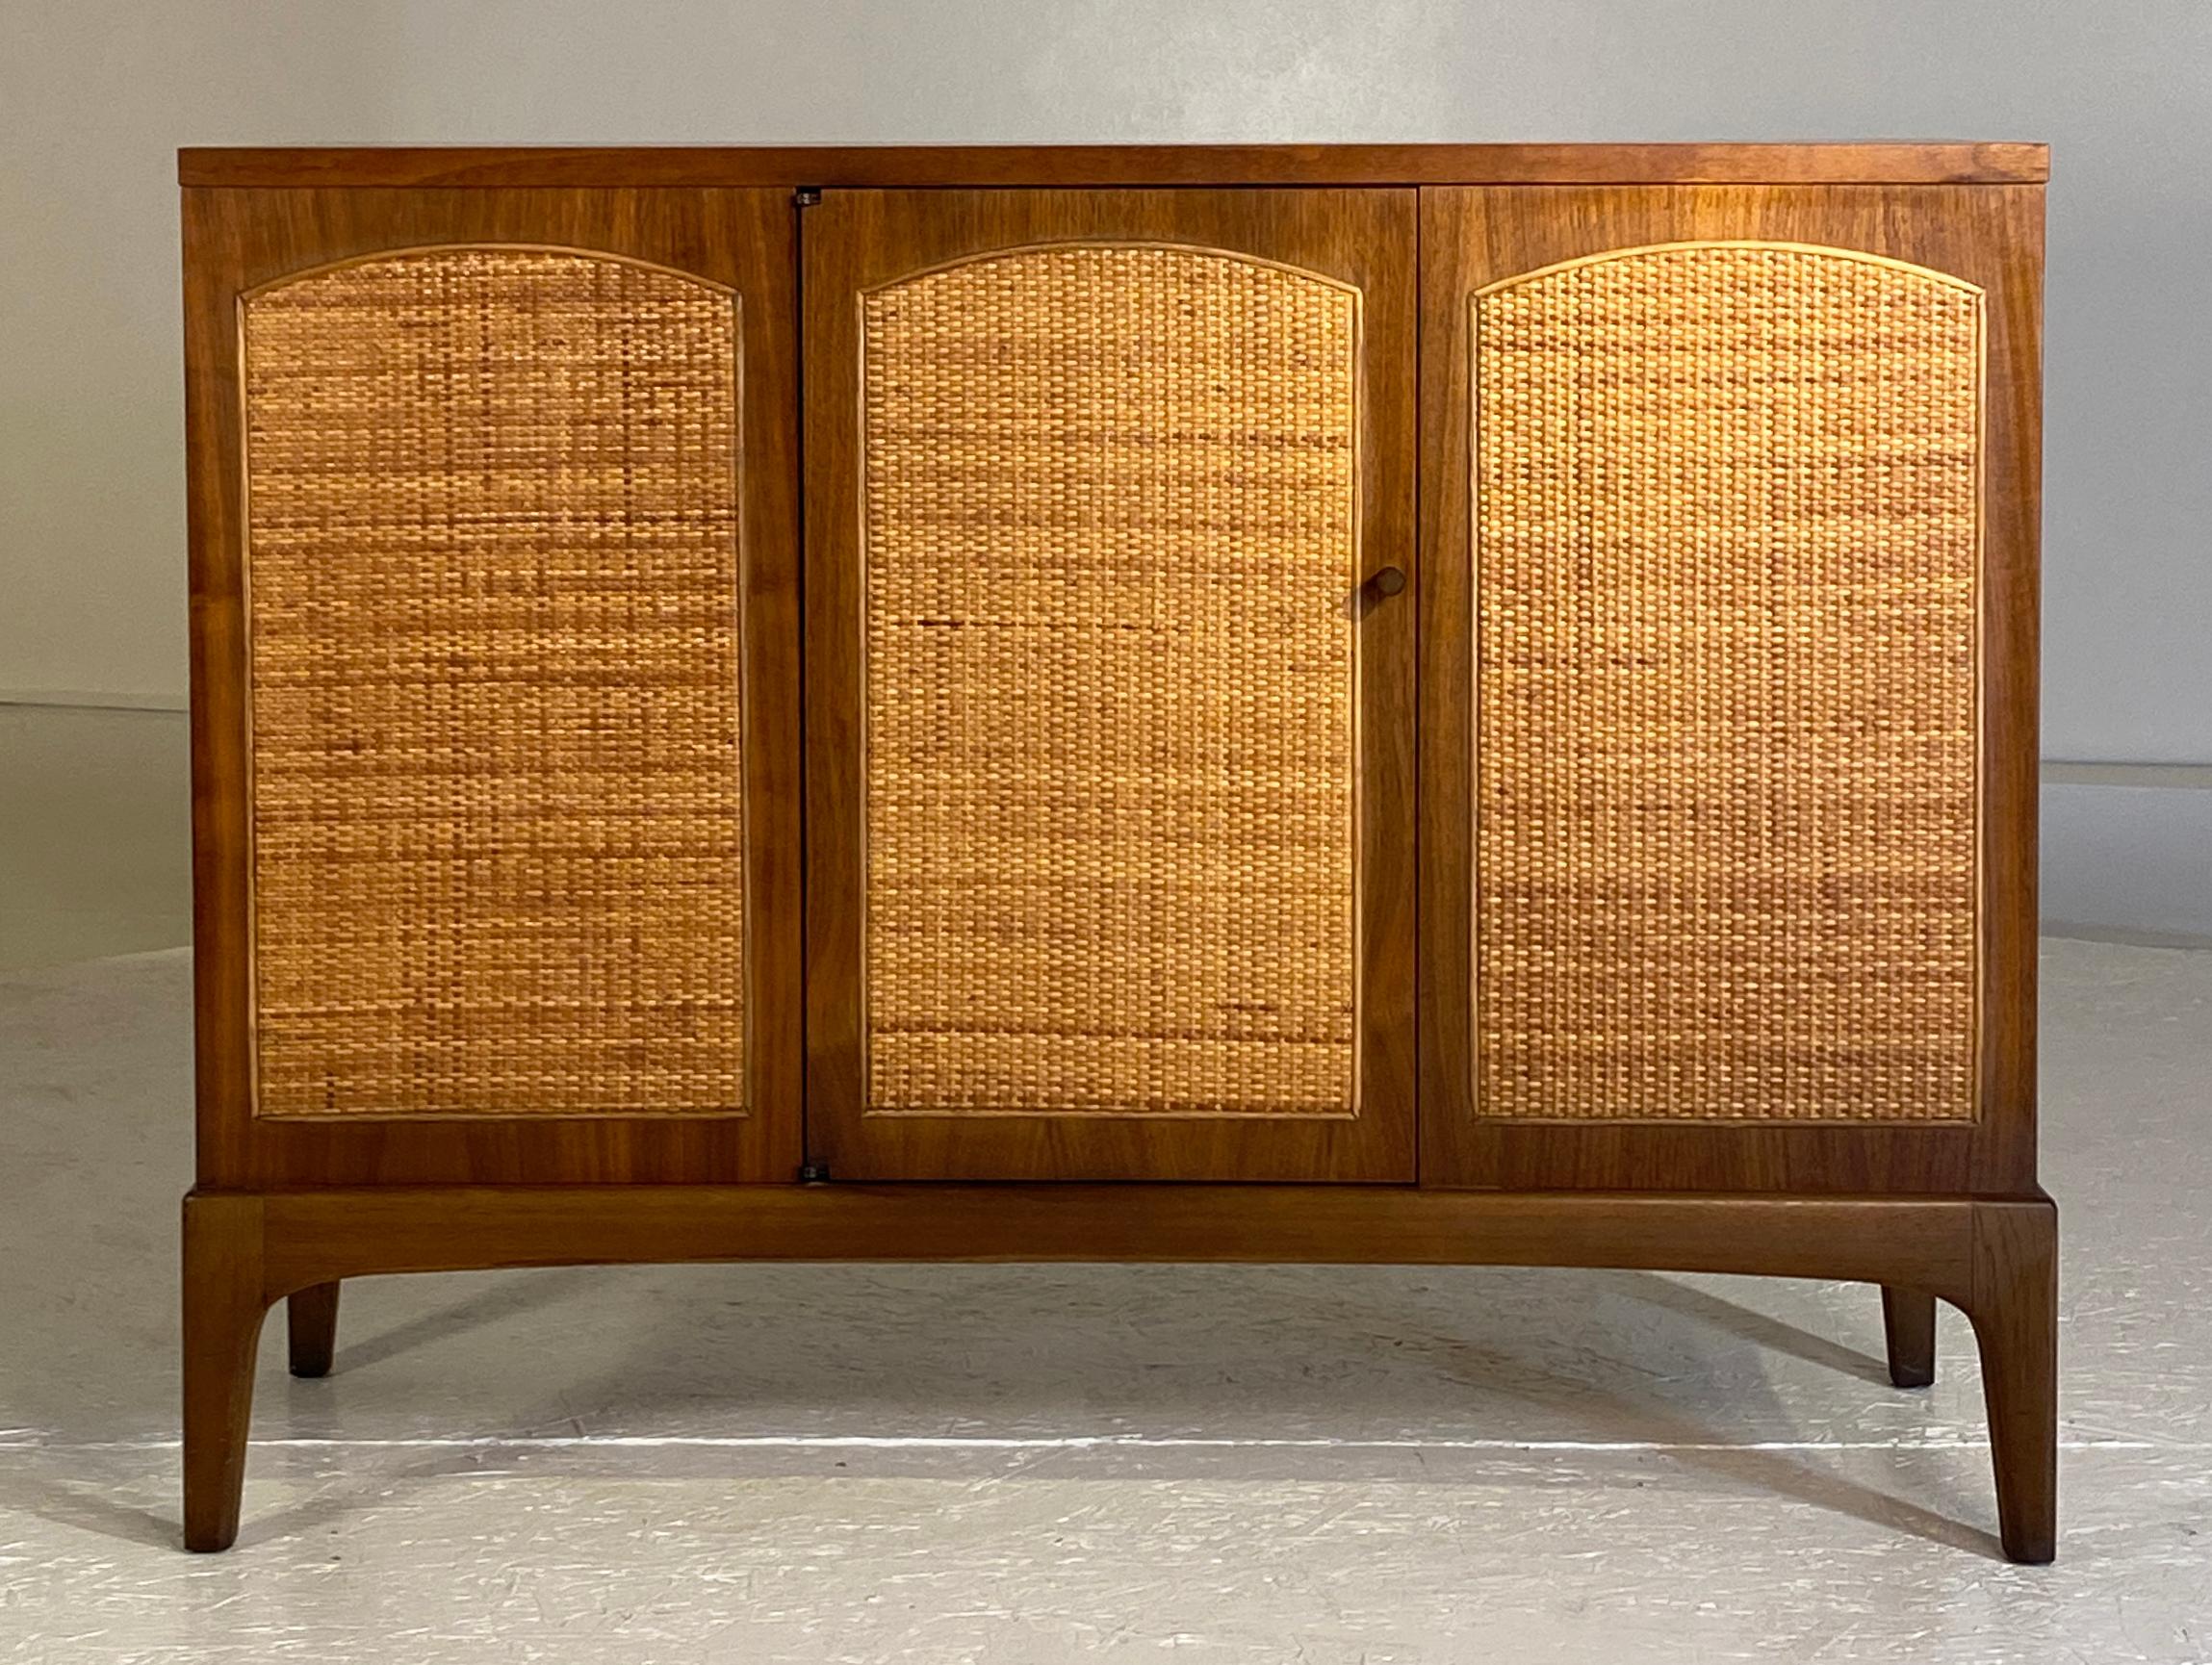 Lane Alta Vista Rhythm Series. This diminutive cabinet is a pleasure to own and has the original finish in excellent condition. A single door in the center opens to reveal storage space including a fixed shelf on center. Beautiful walnut